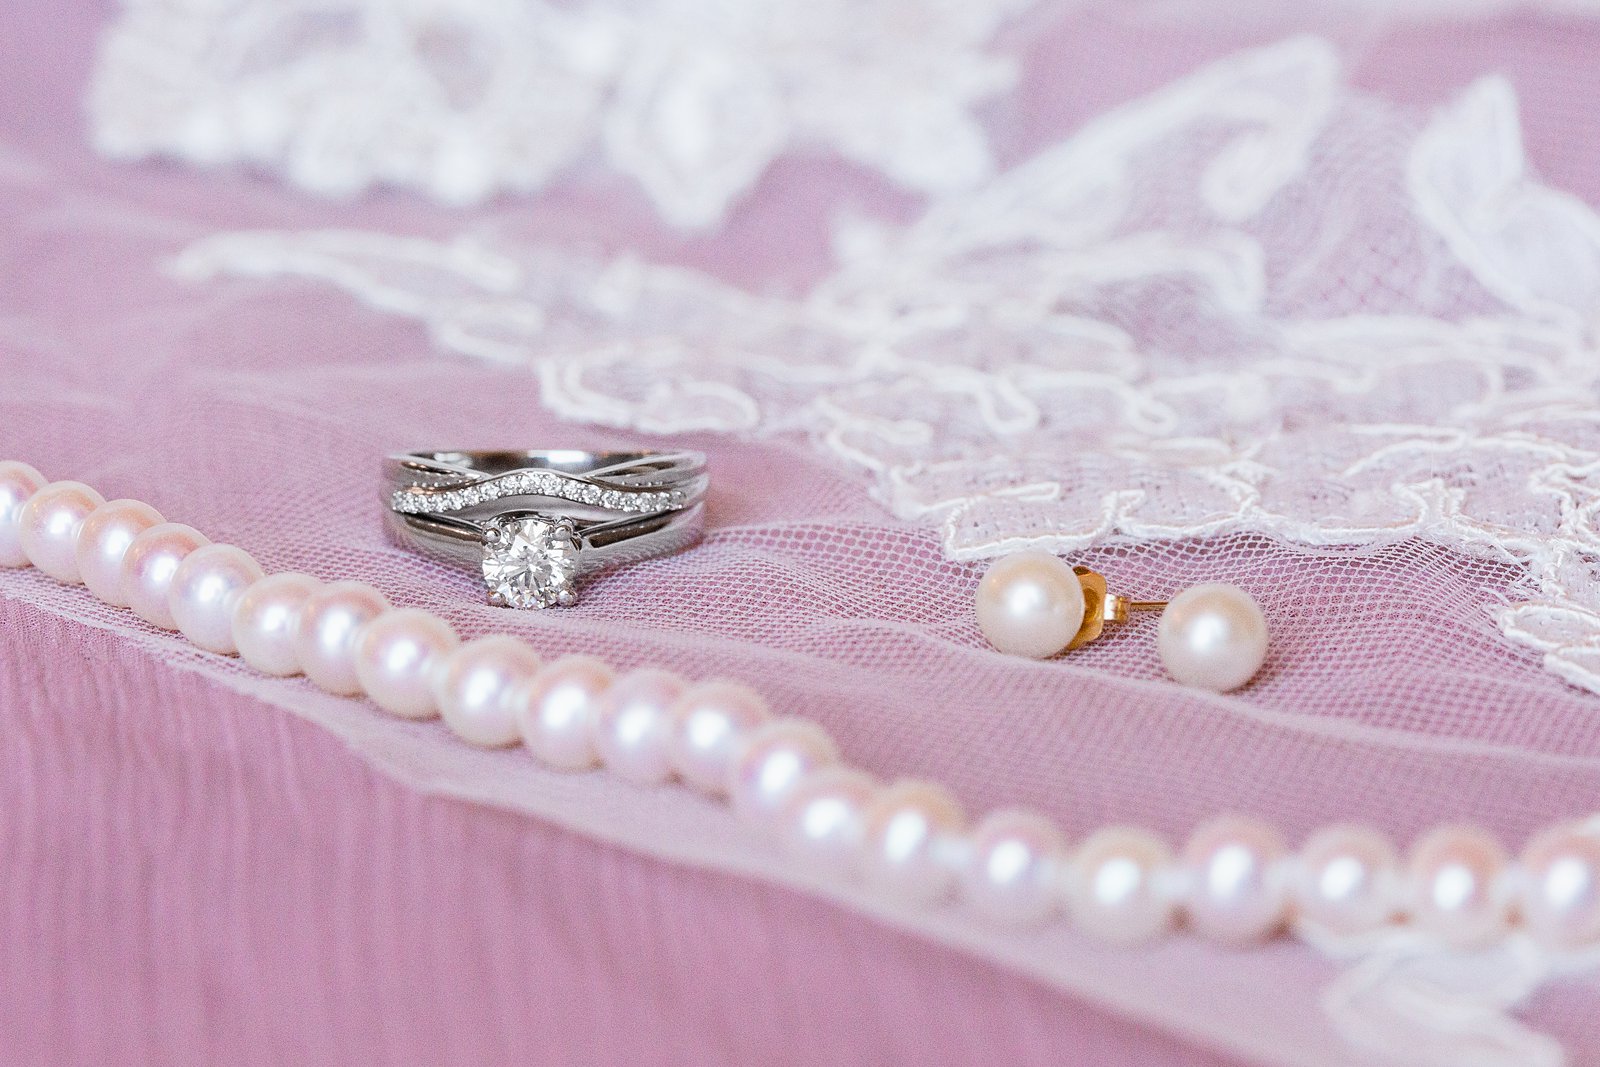 Brides's wedding day details of her wedding ring and pearls on her veil by PMA Photography.